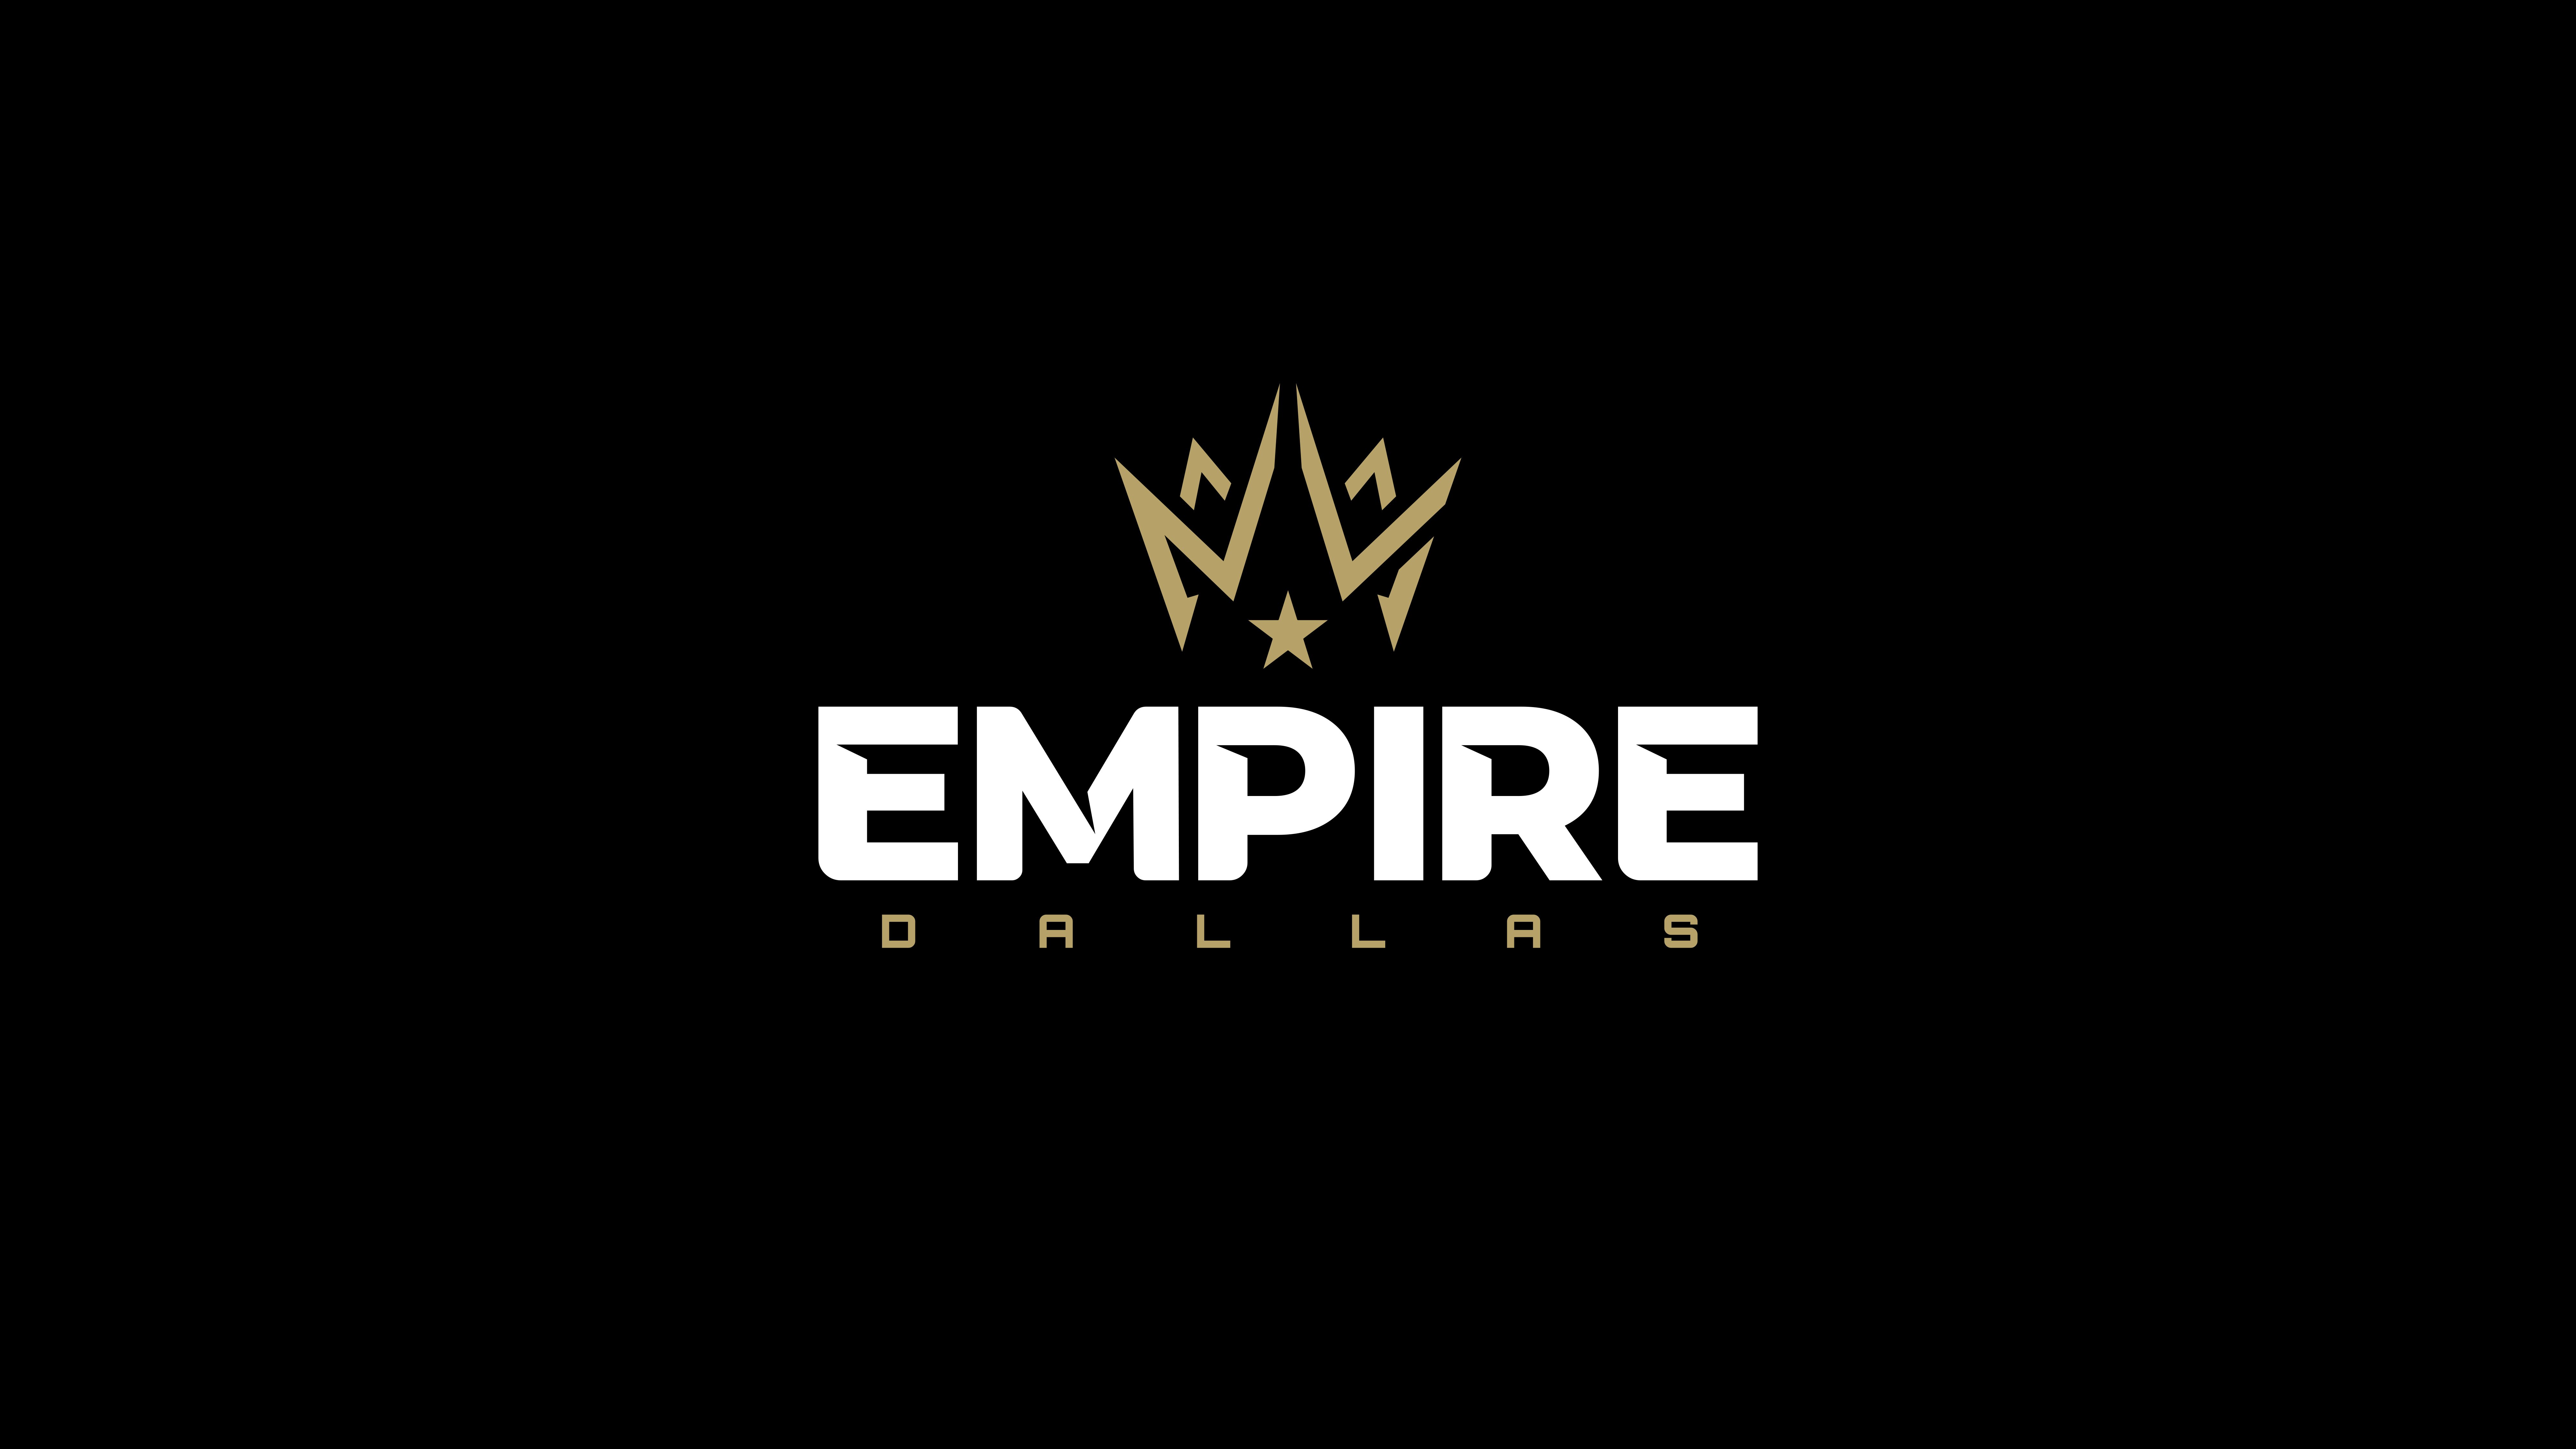 Call of Duty League moves remaining 2020 matches to online due to coronavirus,